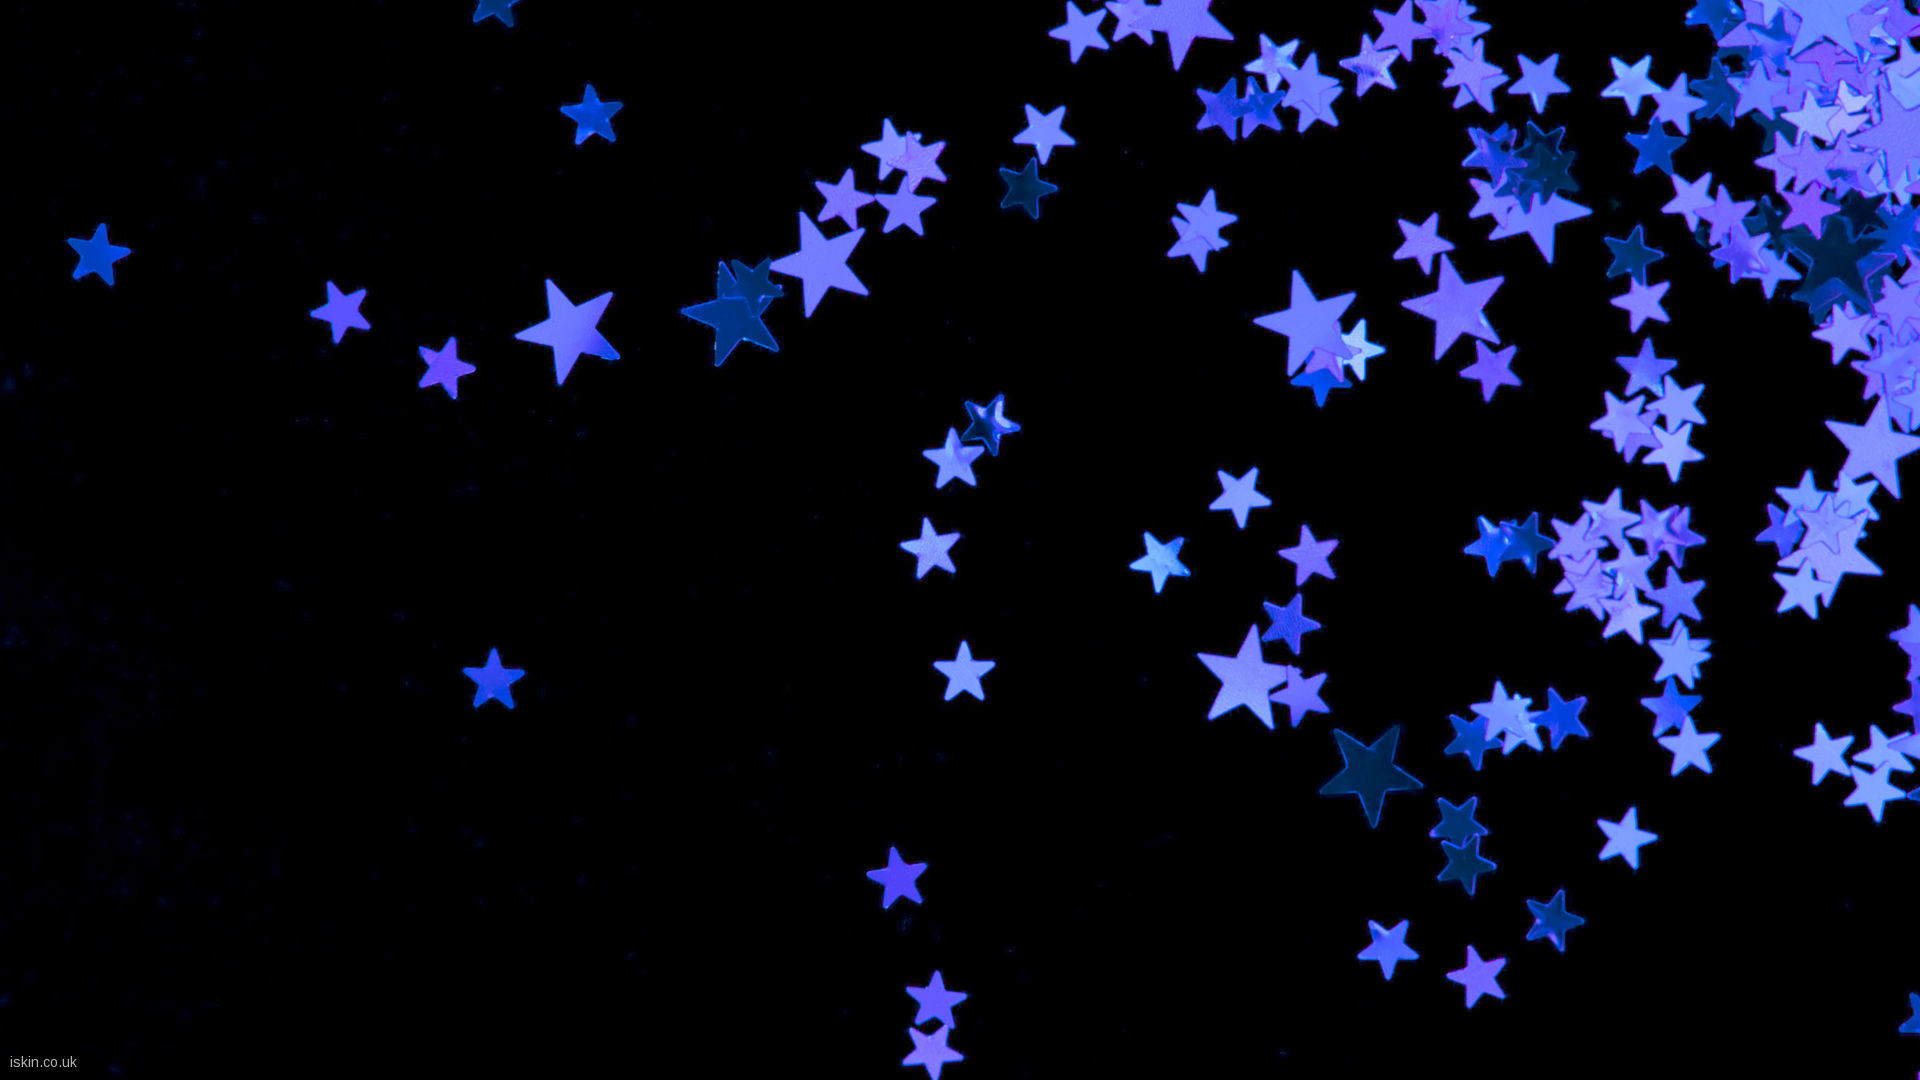 1920x1080 Black And Blue Star Background Images 6 HD Wallpapers